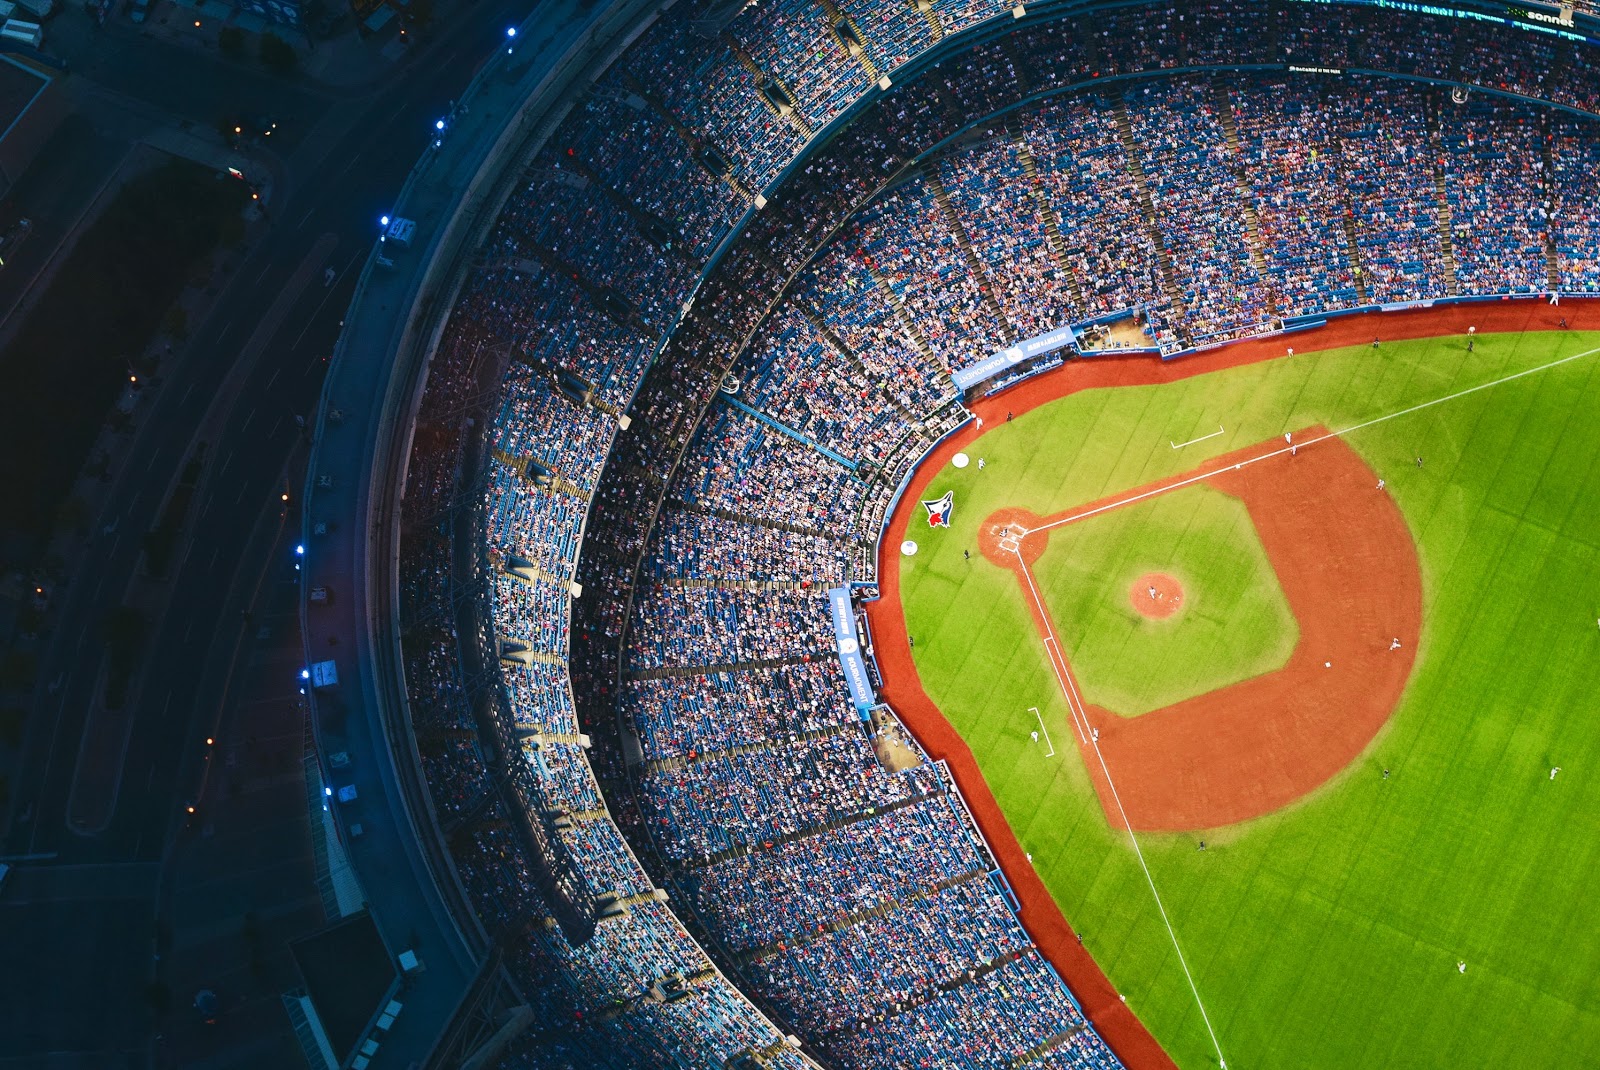 image showing a baseball diamond from above - to be embedded within how to sell baseball cards post on gigworker.com